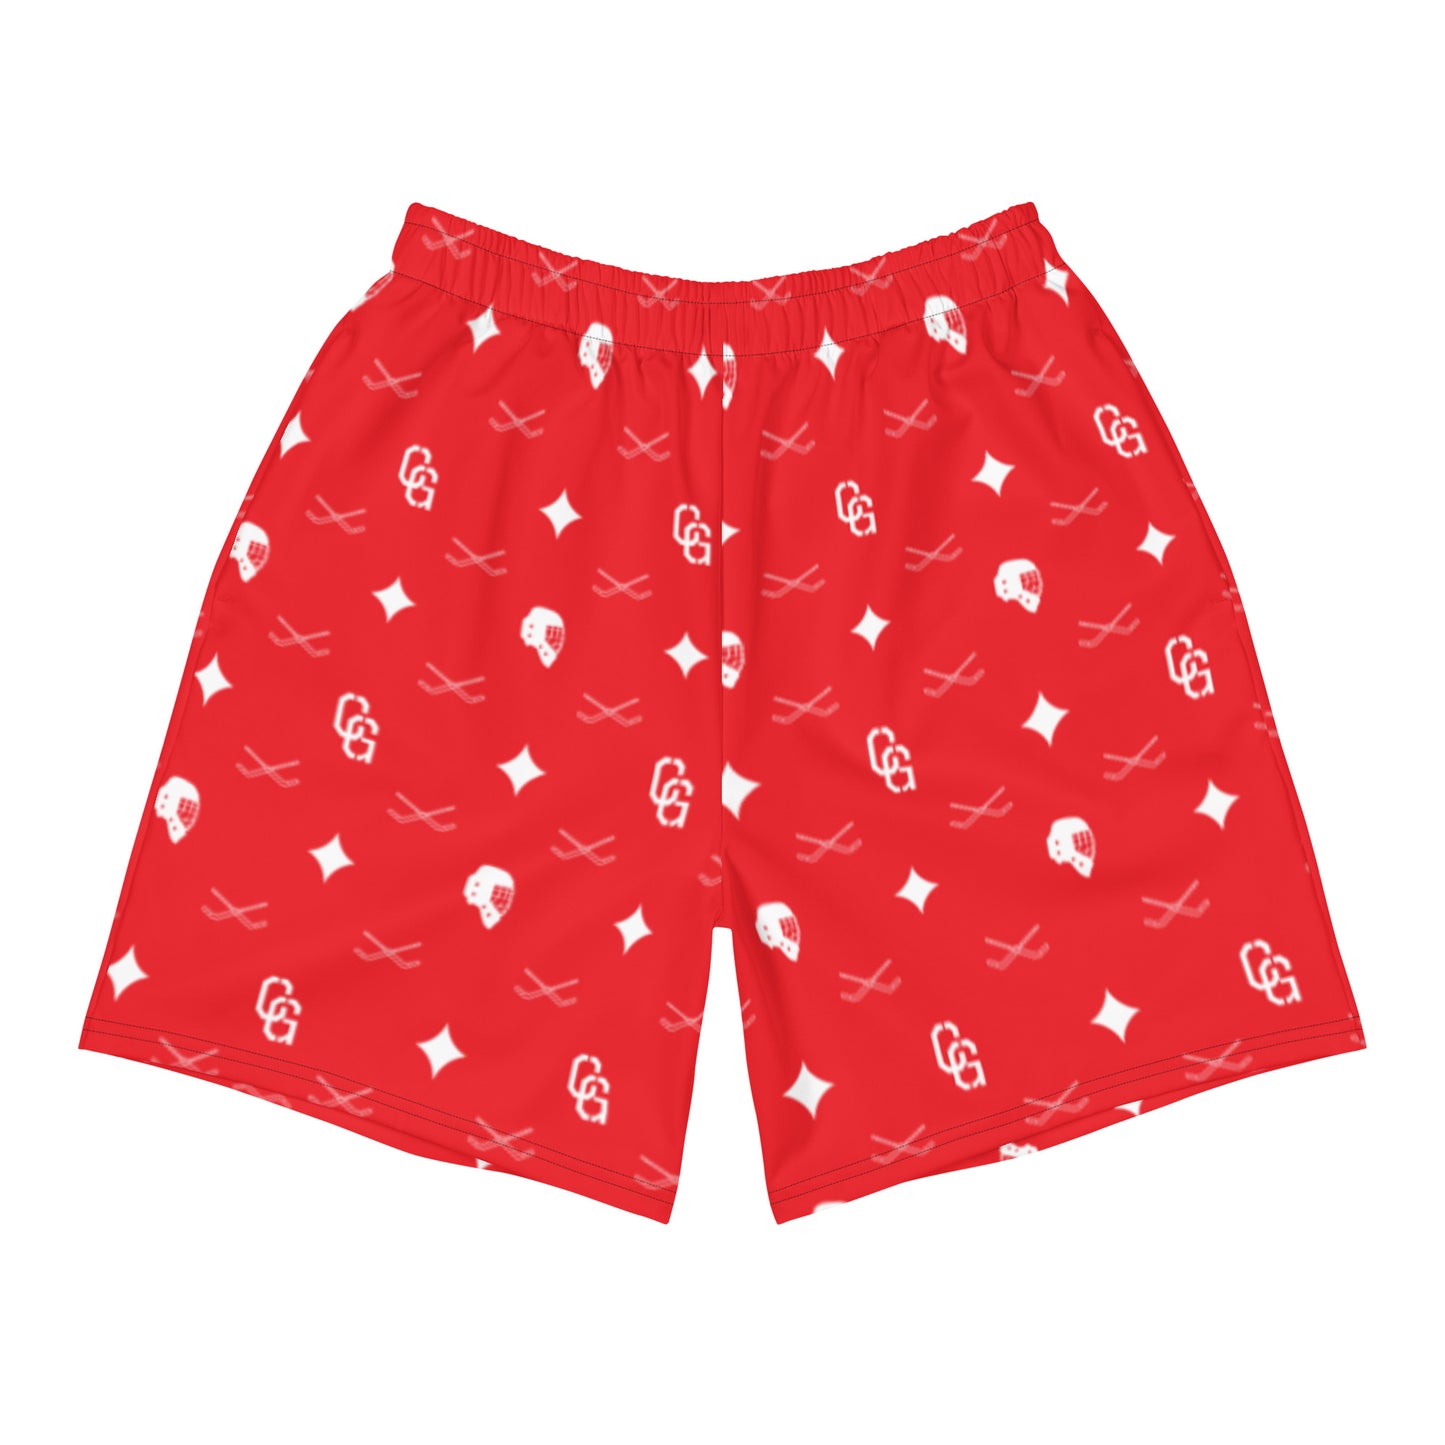 Men's Red Lux Print Athletic Shorts